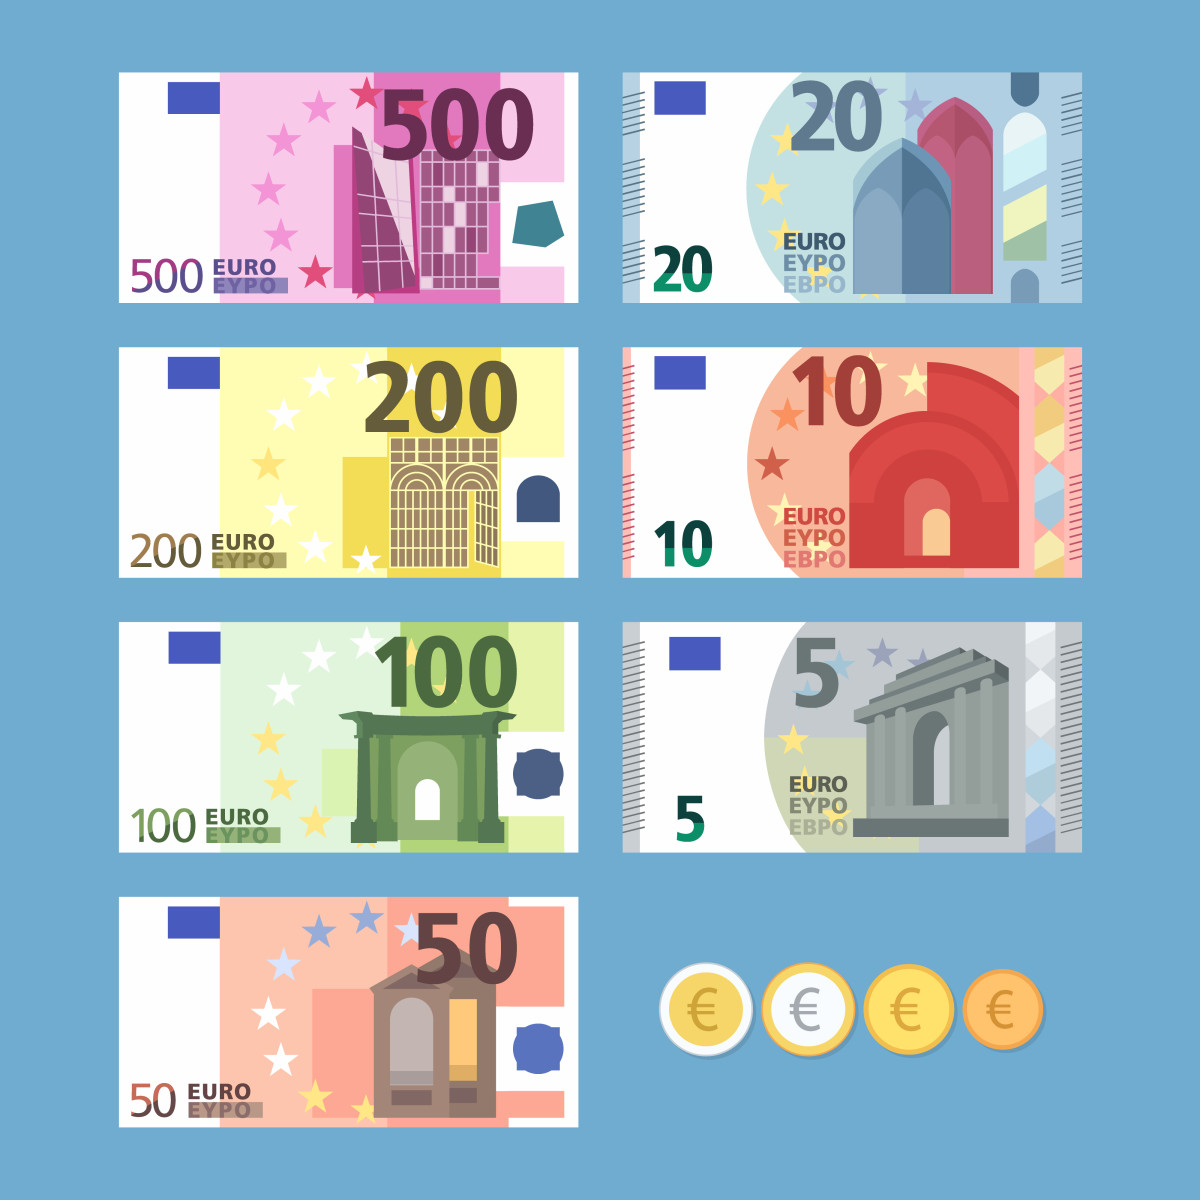 Demystifying The Euro Frequency: How Often Is It Used In Global Transactions?